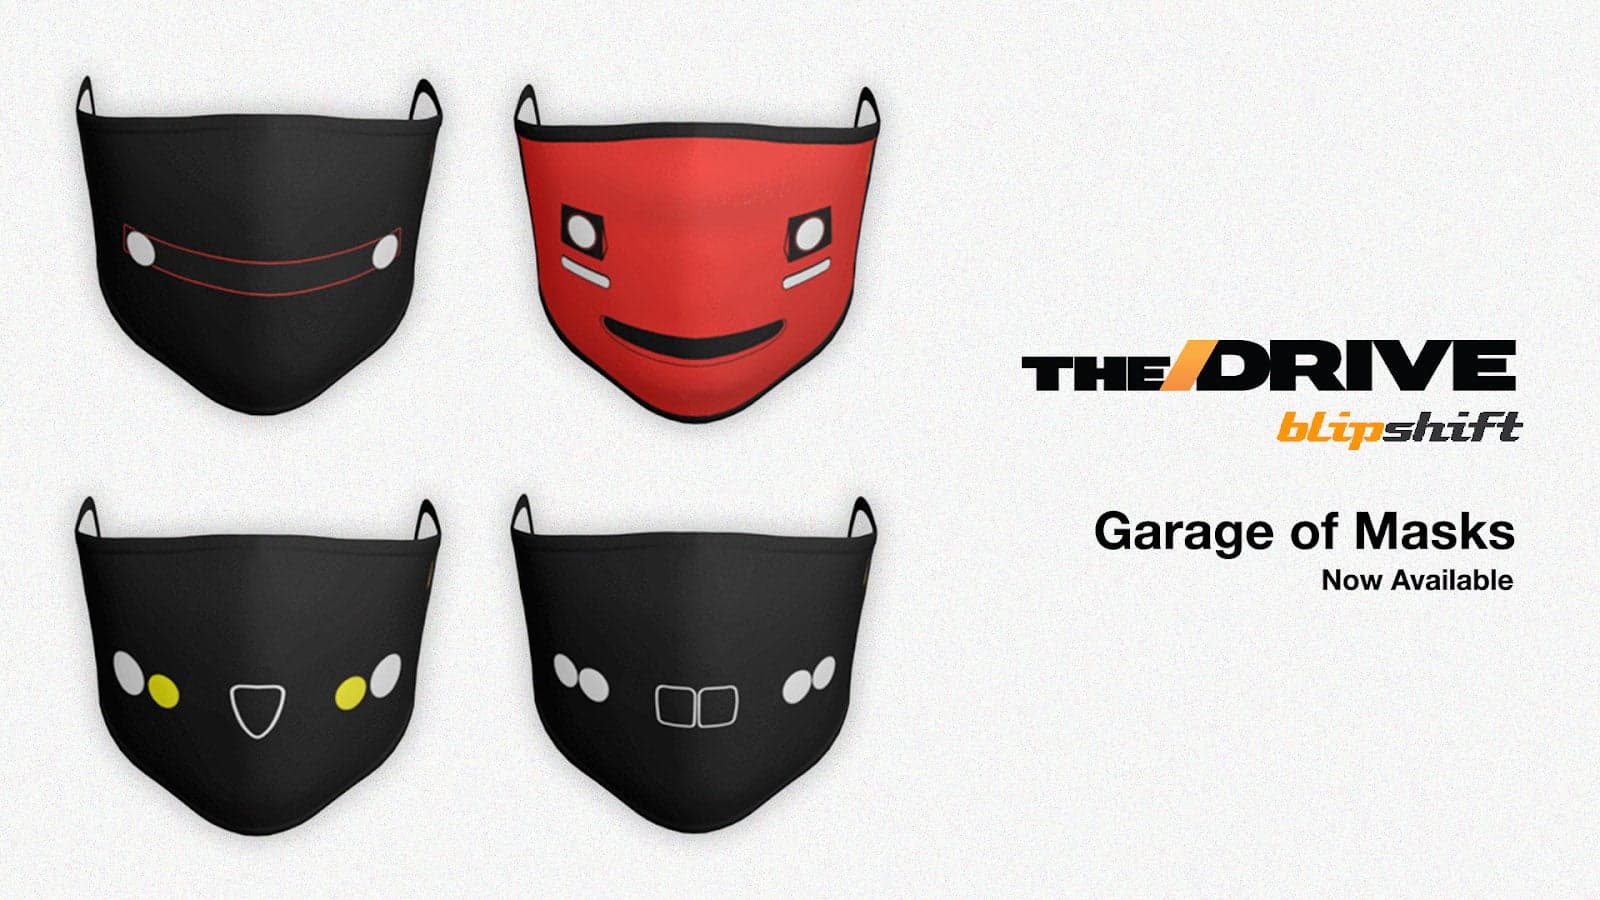 The Drive Has Your Holiday Shopping Covered! New Car Masks And T-Shirts From Blipshift